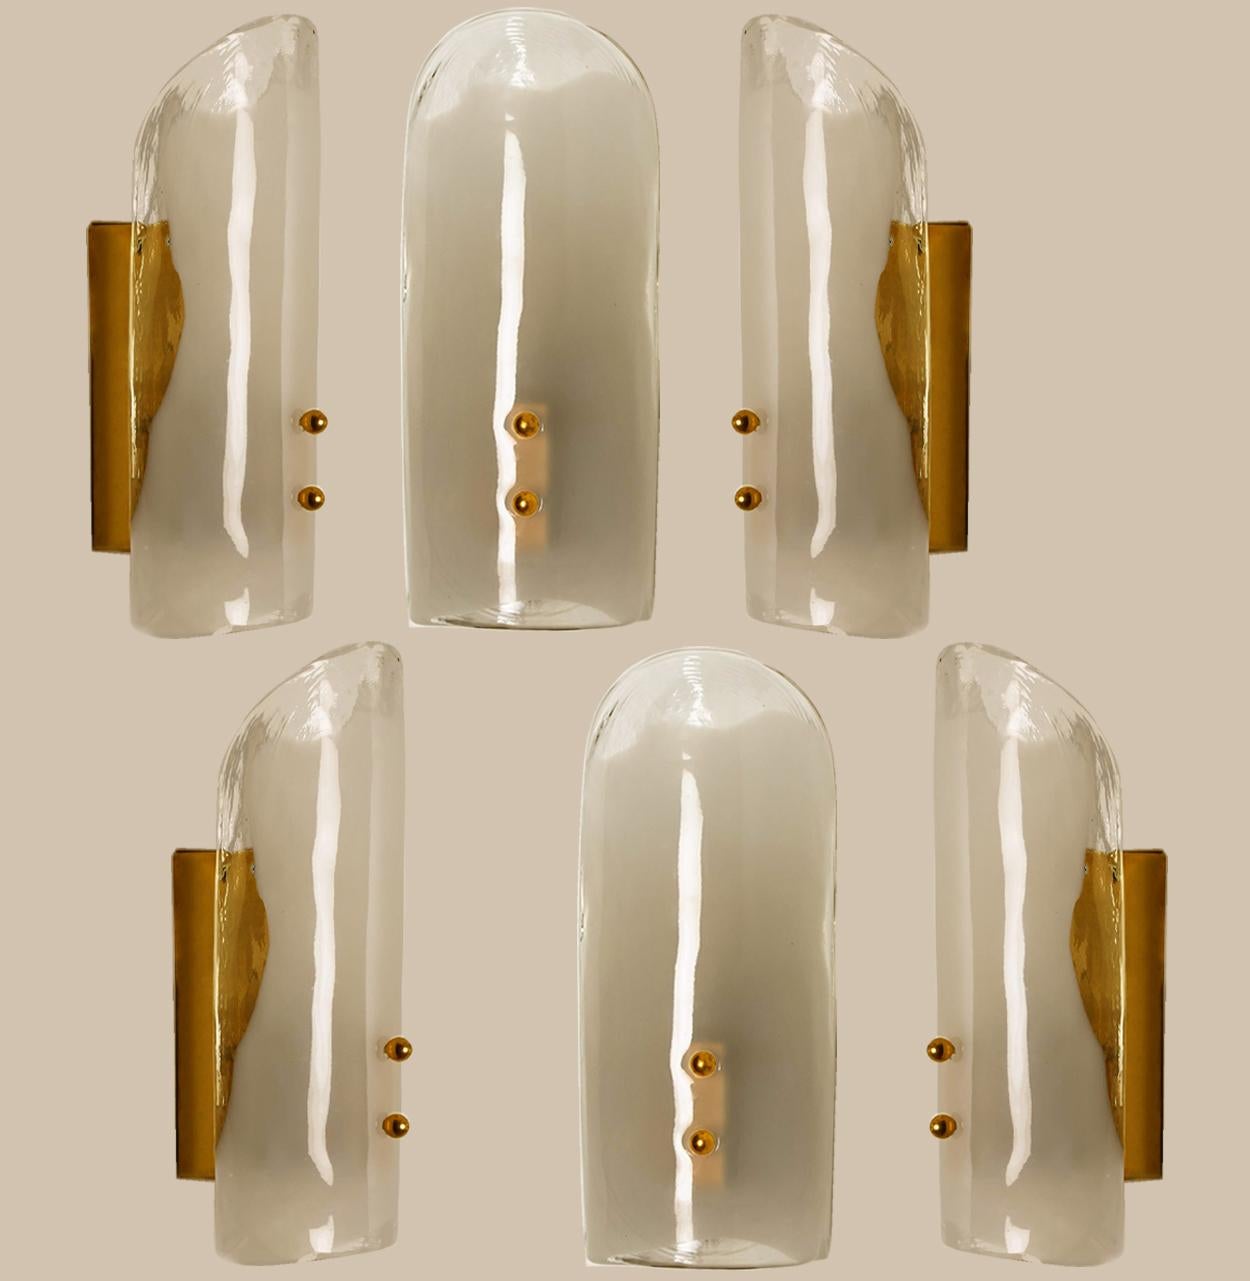 High-end wall sconces made of blown clear and opal Murano glass on a messing hardware. Designed and produced by J.T. Kalmar, Austria in the 1960s. Minimalistic design executed with a taste for excellence in craftsmanship. These are real statement